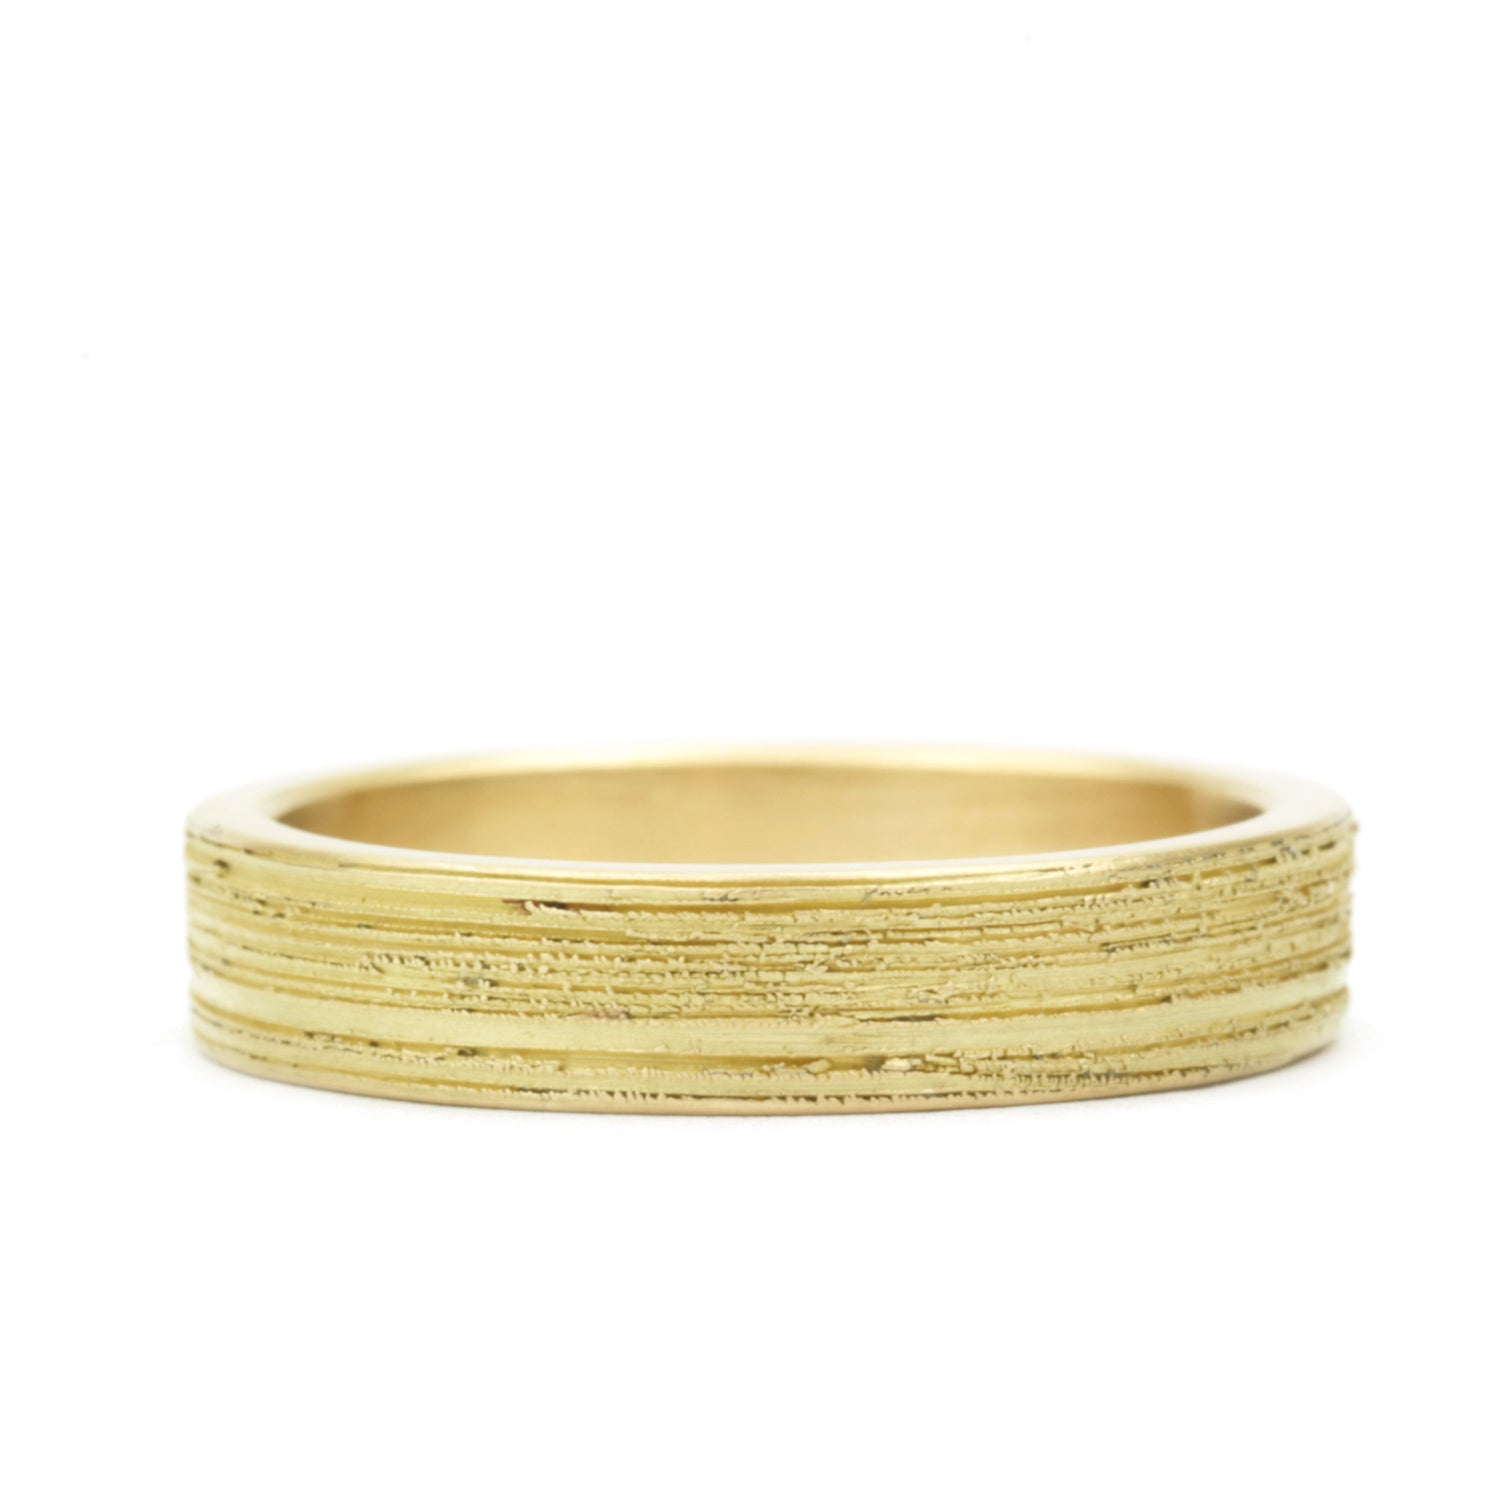 Concrete Band 4.5 mm in 18K yellow gold